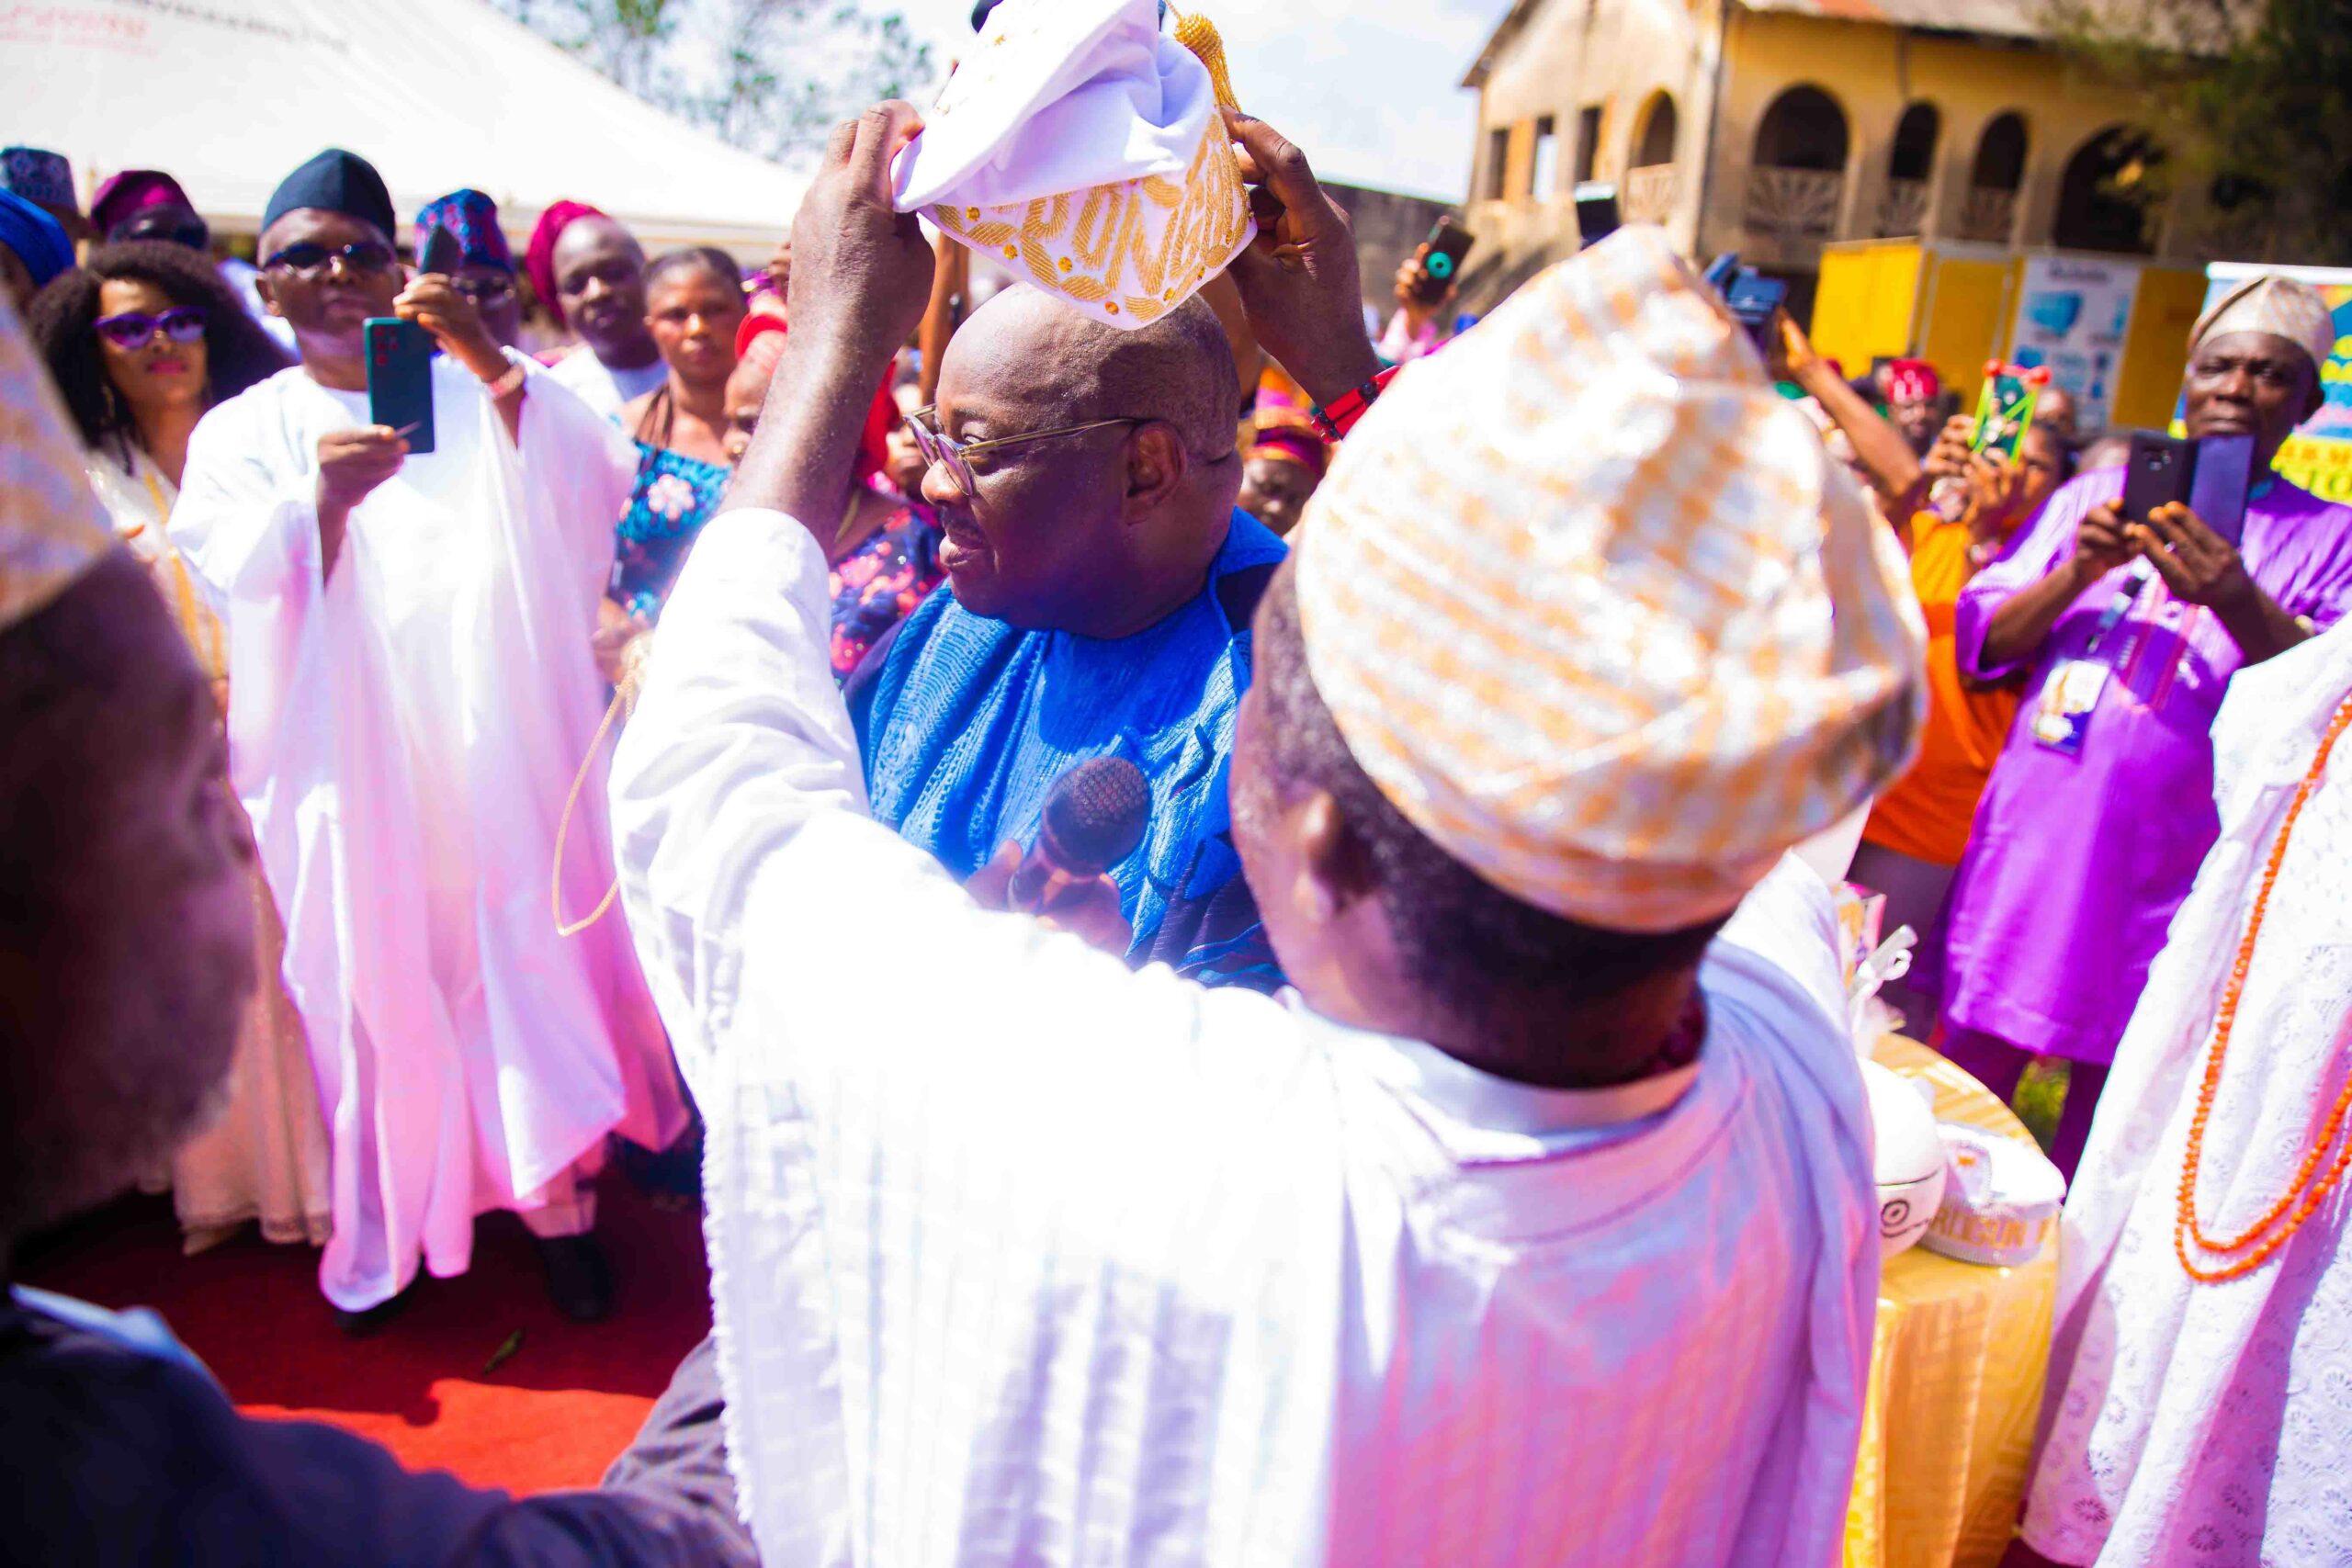 Chief Dele Momodu being installed as the Akinrogun of Gbonganland while Chief Mike Awoyinfa (in white 'Agbada') takes picture with his phone. (Photo credit: Ayodele Efunla)